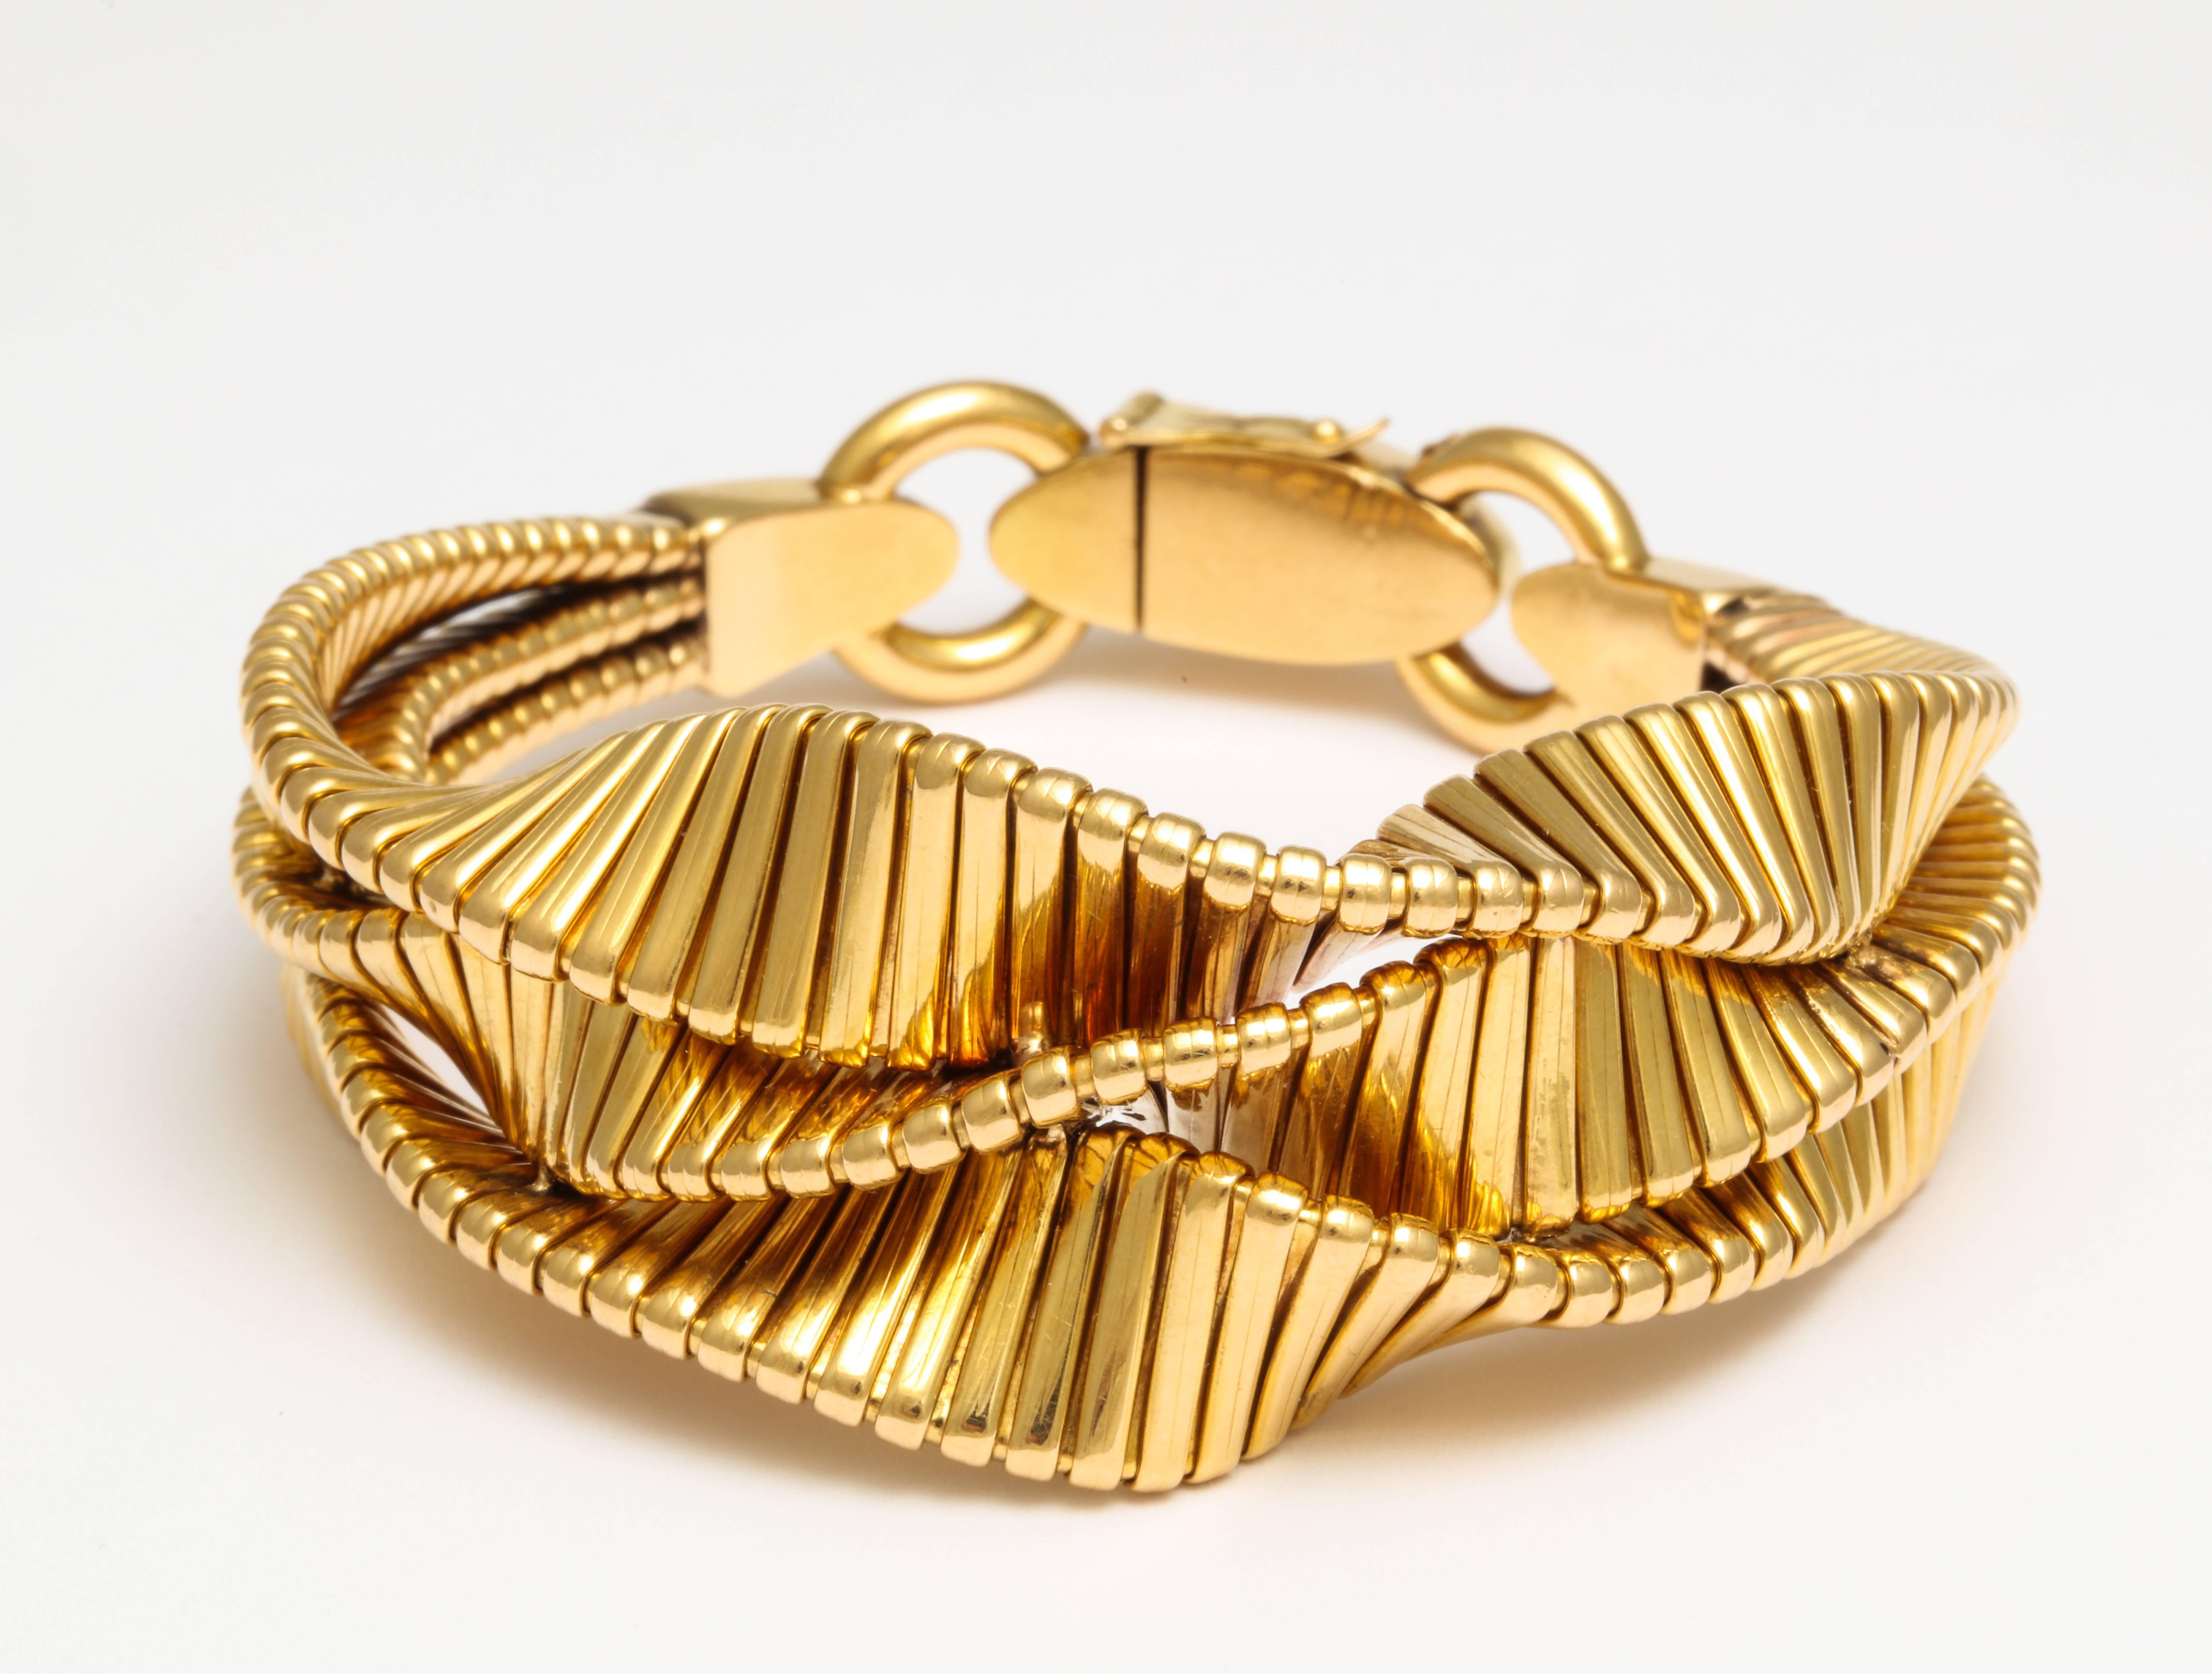 Women's French Twist Retro Tube-Gas Gold Necklace and Bracelet